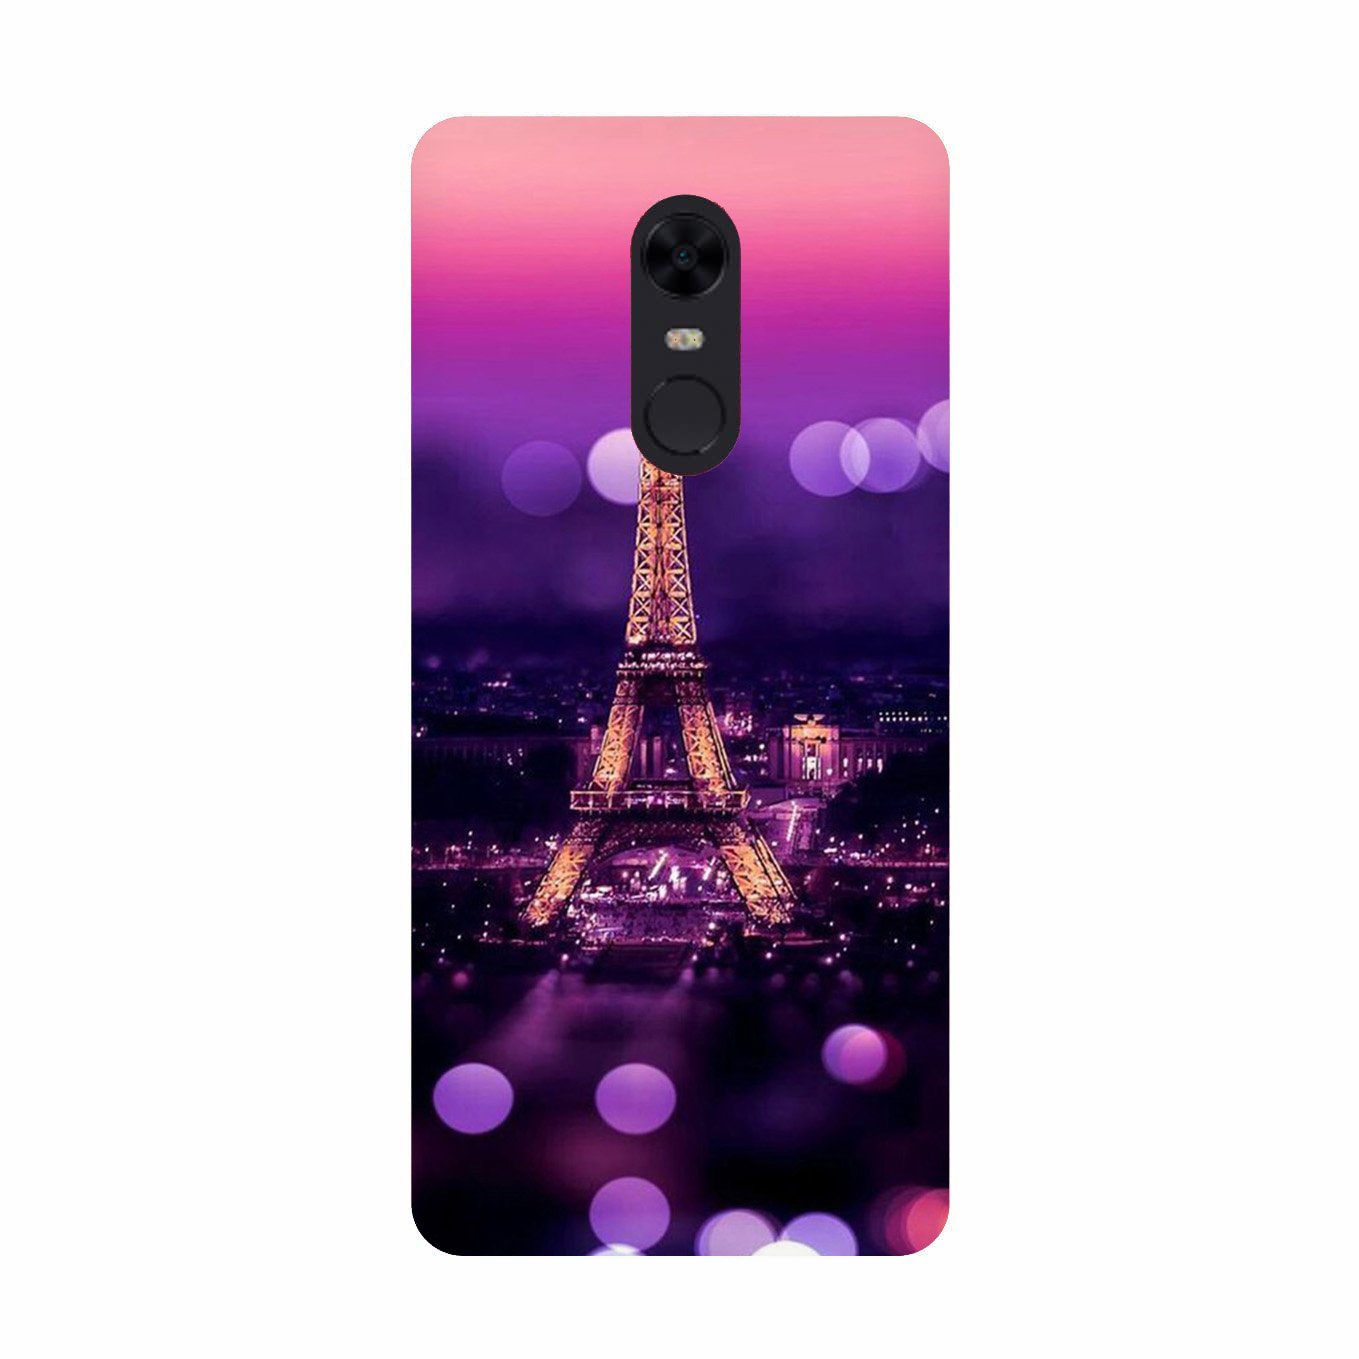 Eiffel Tower Case for Redmi Note 4